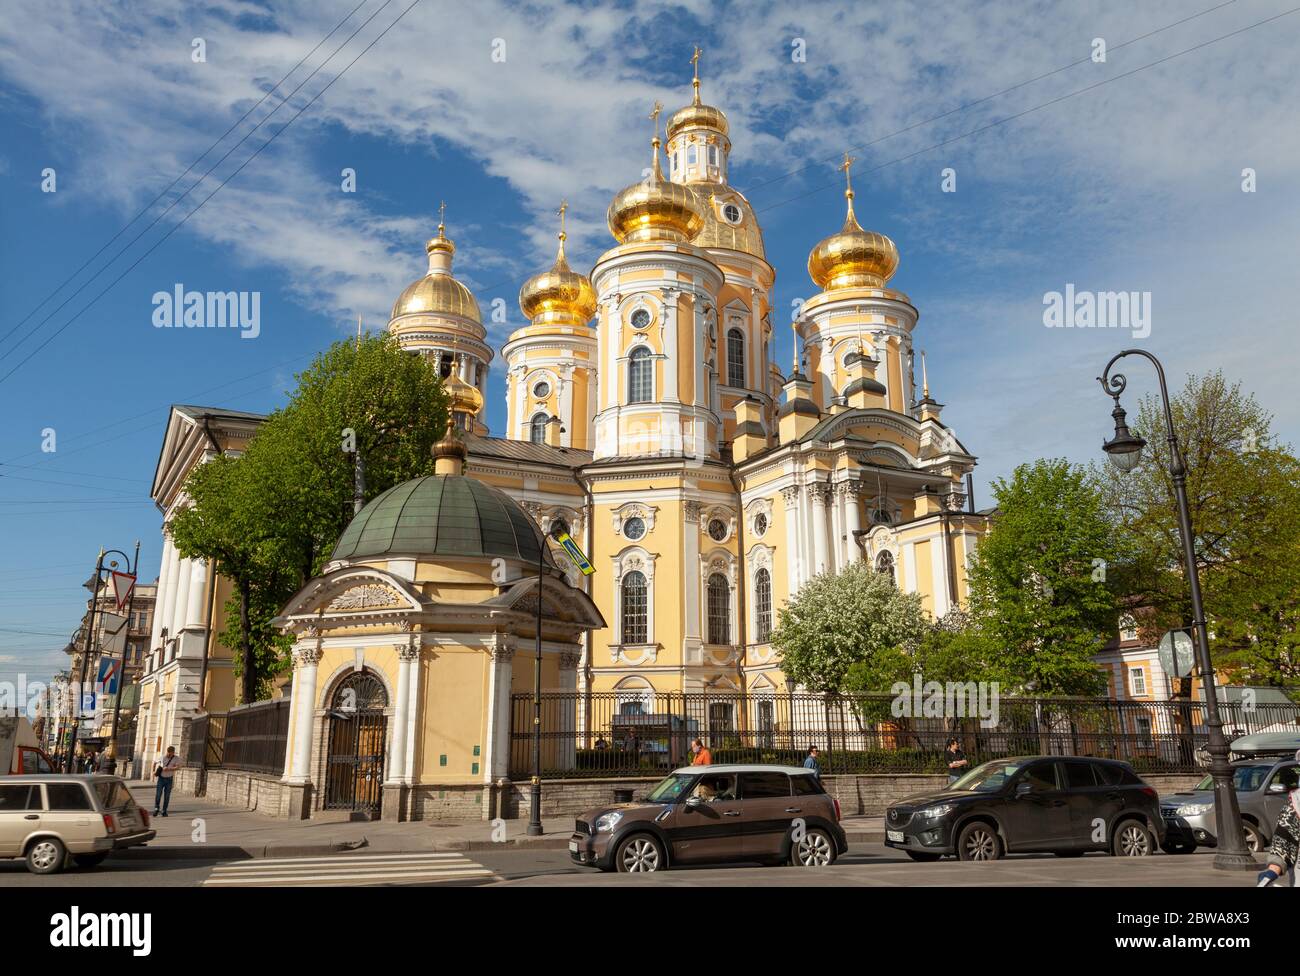 Our Lady of Vladimir Church, Vladimirsky Prospect, St. Petersburg, Russia. Stock Photo